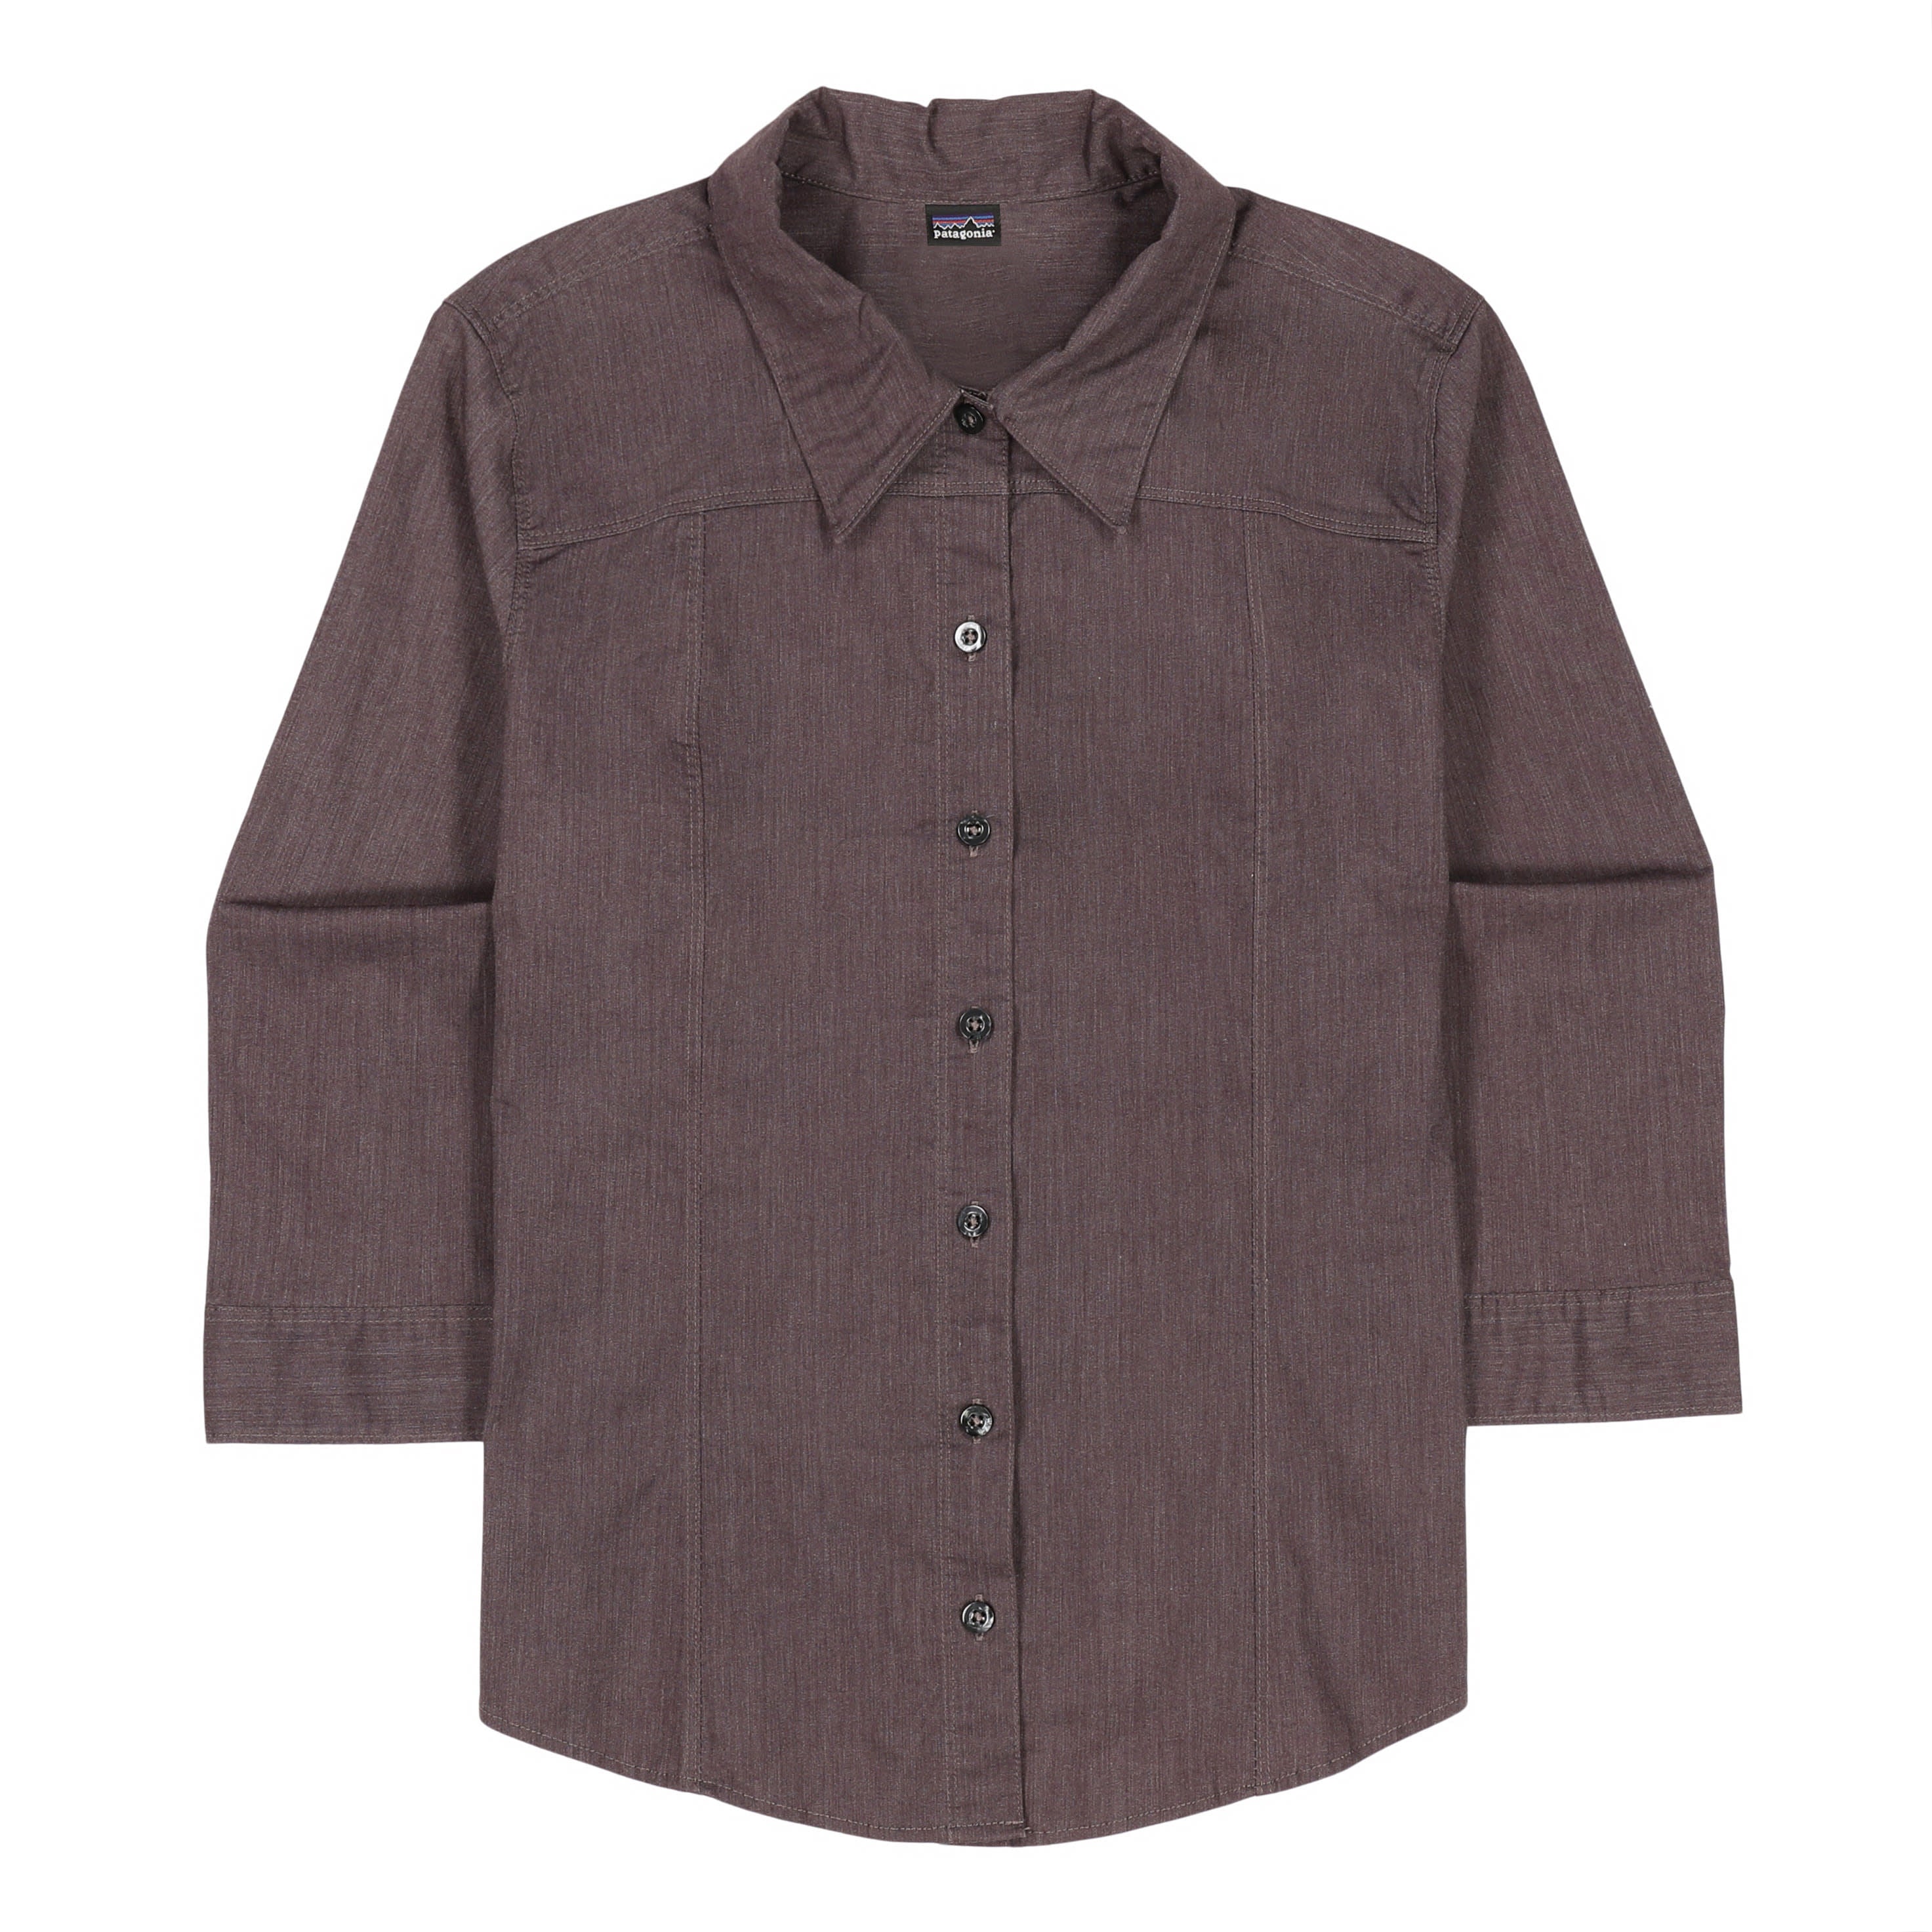 W's 3/4-Sleeved Stretch Comfort Shirt